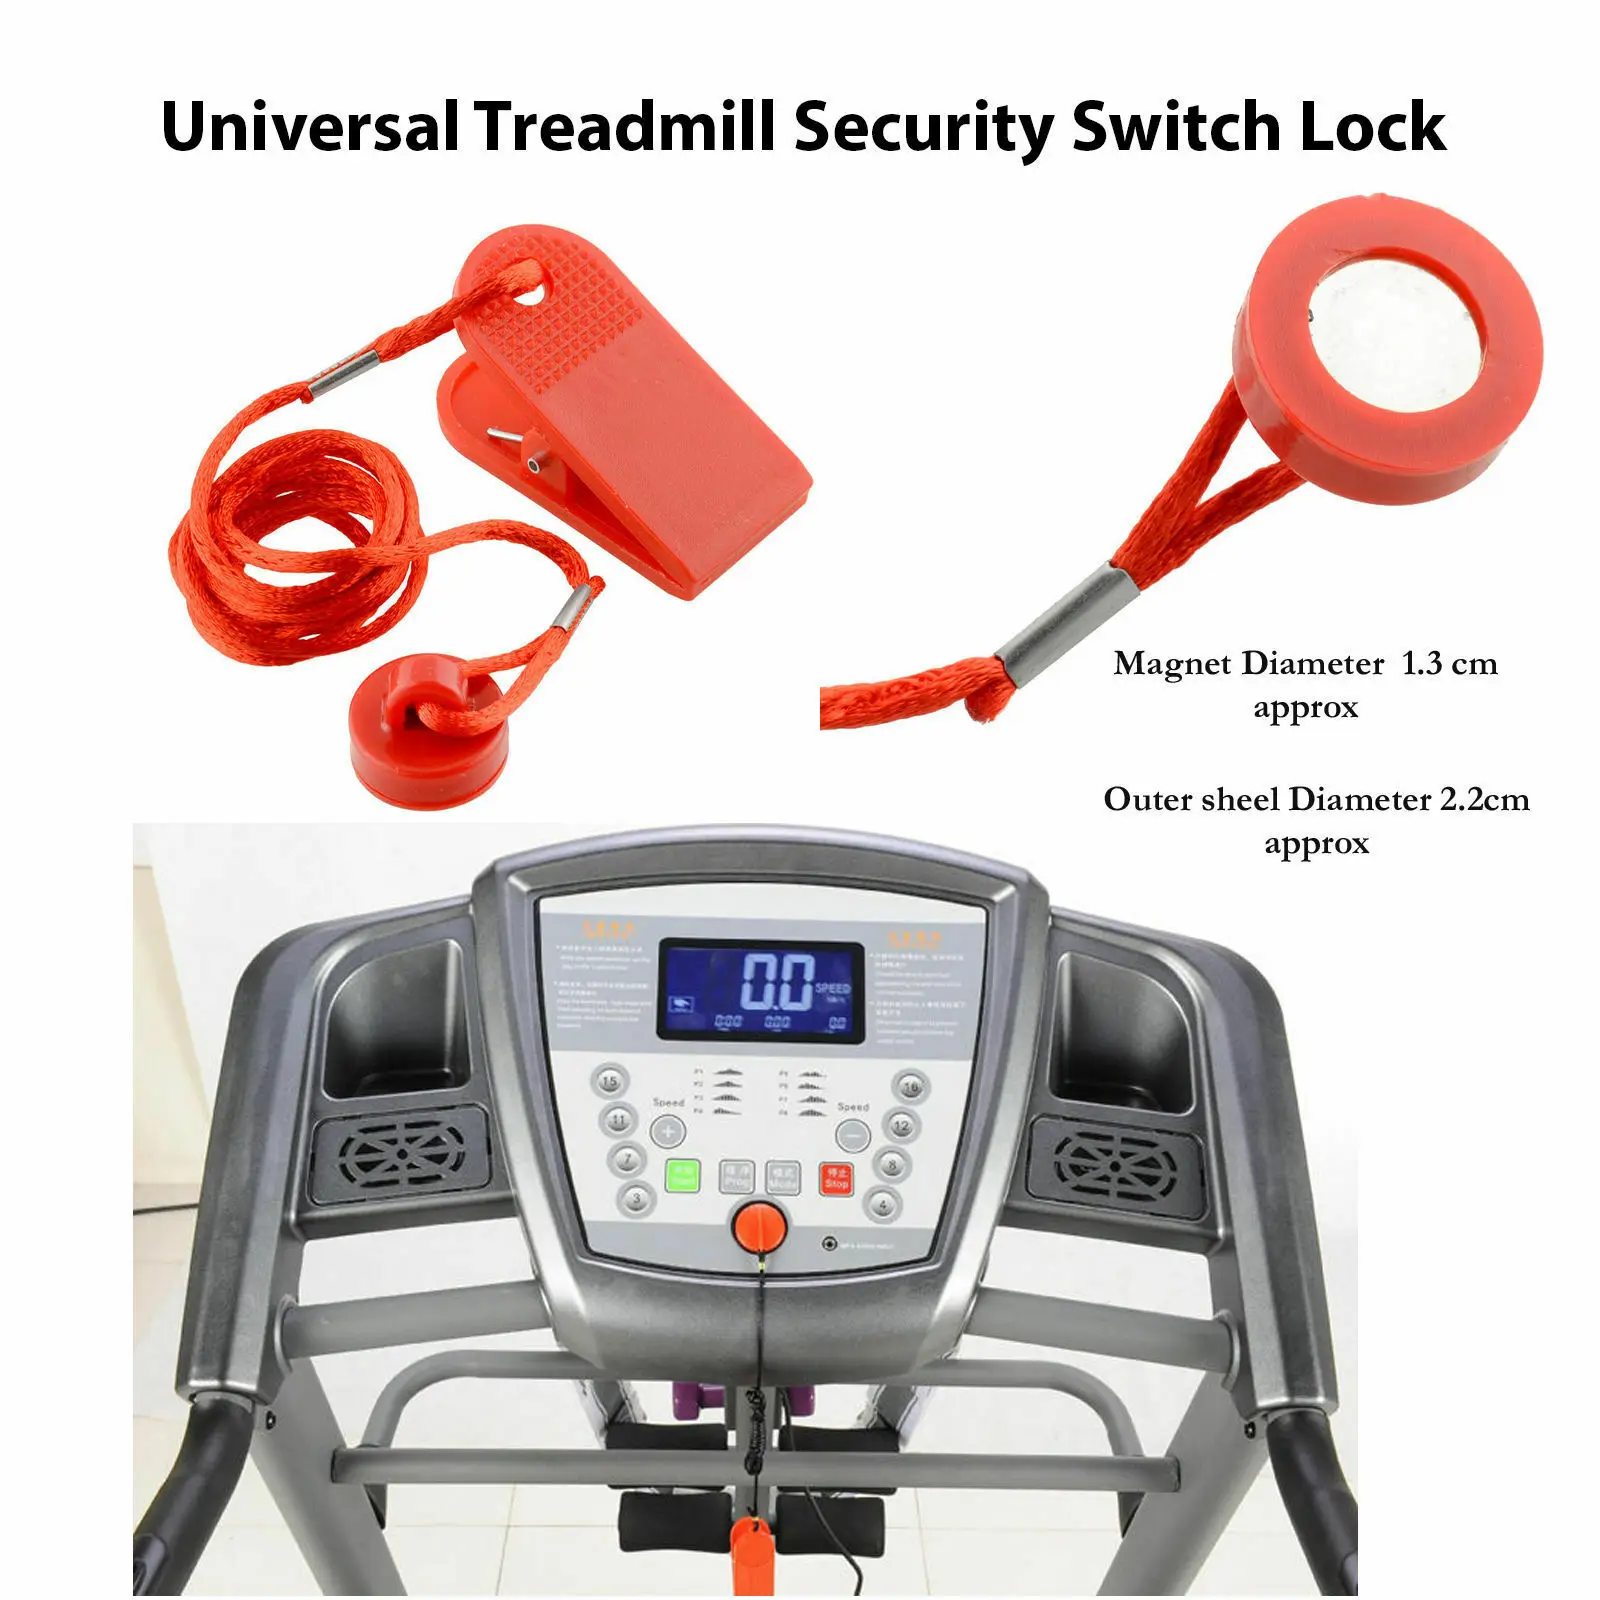 Universal Running Machine Safety Key Treadmill Magnetic Security Switch Lock SML 